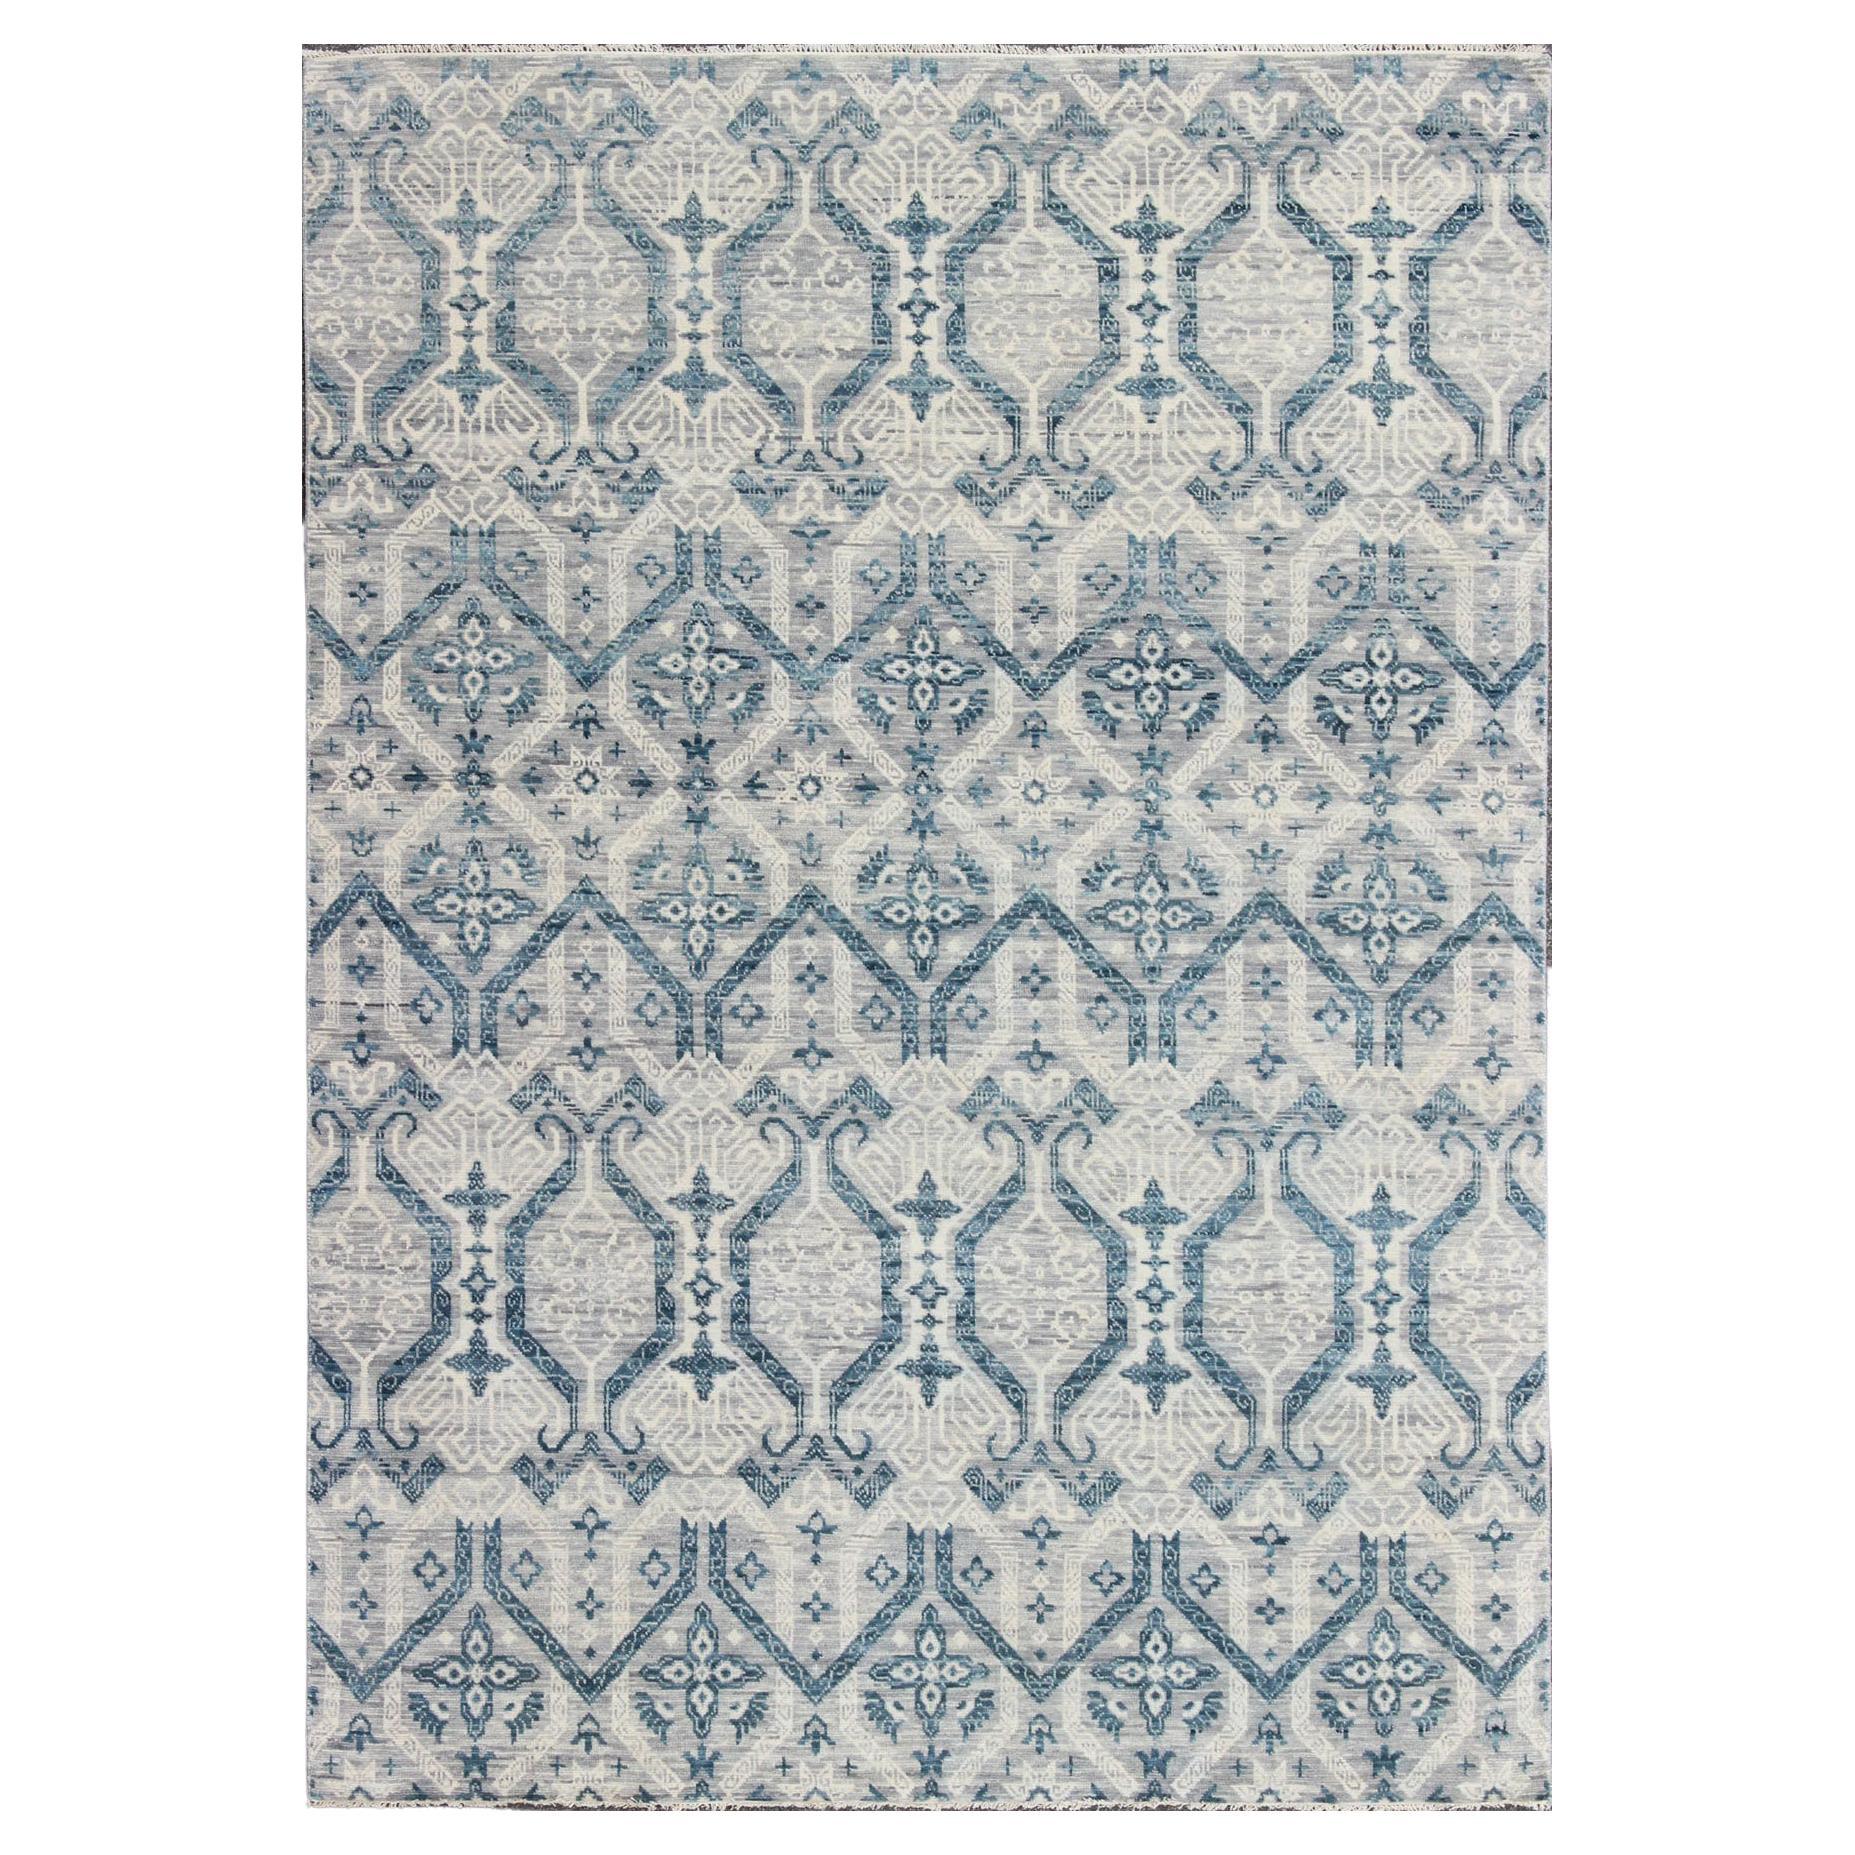 Geometric All-Over Transitional Rug in Shades of Blue, Gray & Ivory